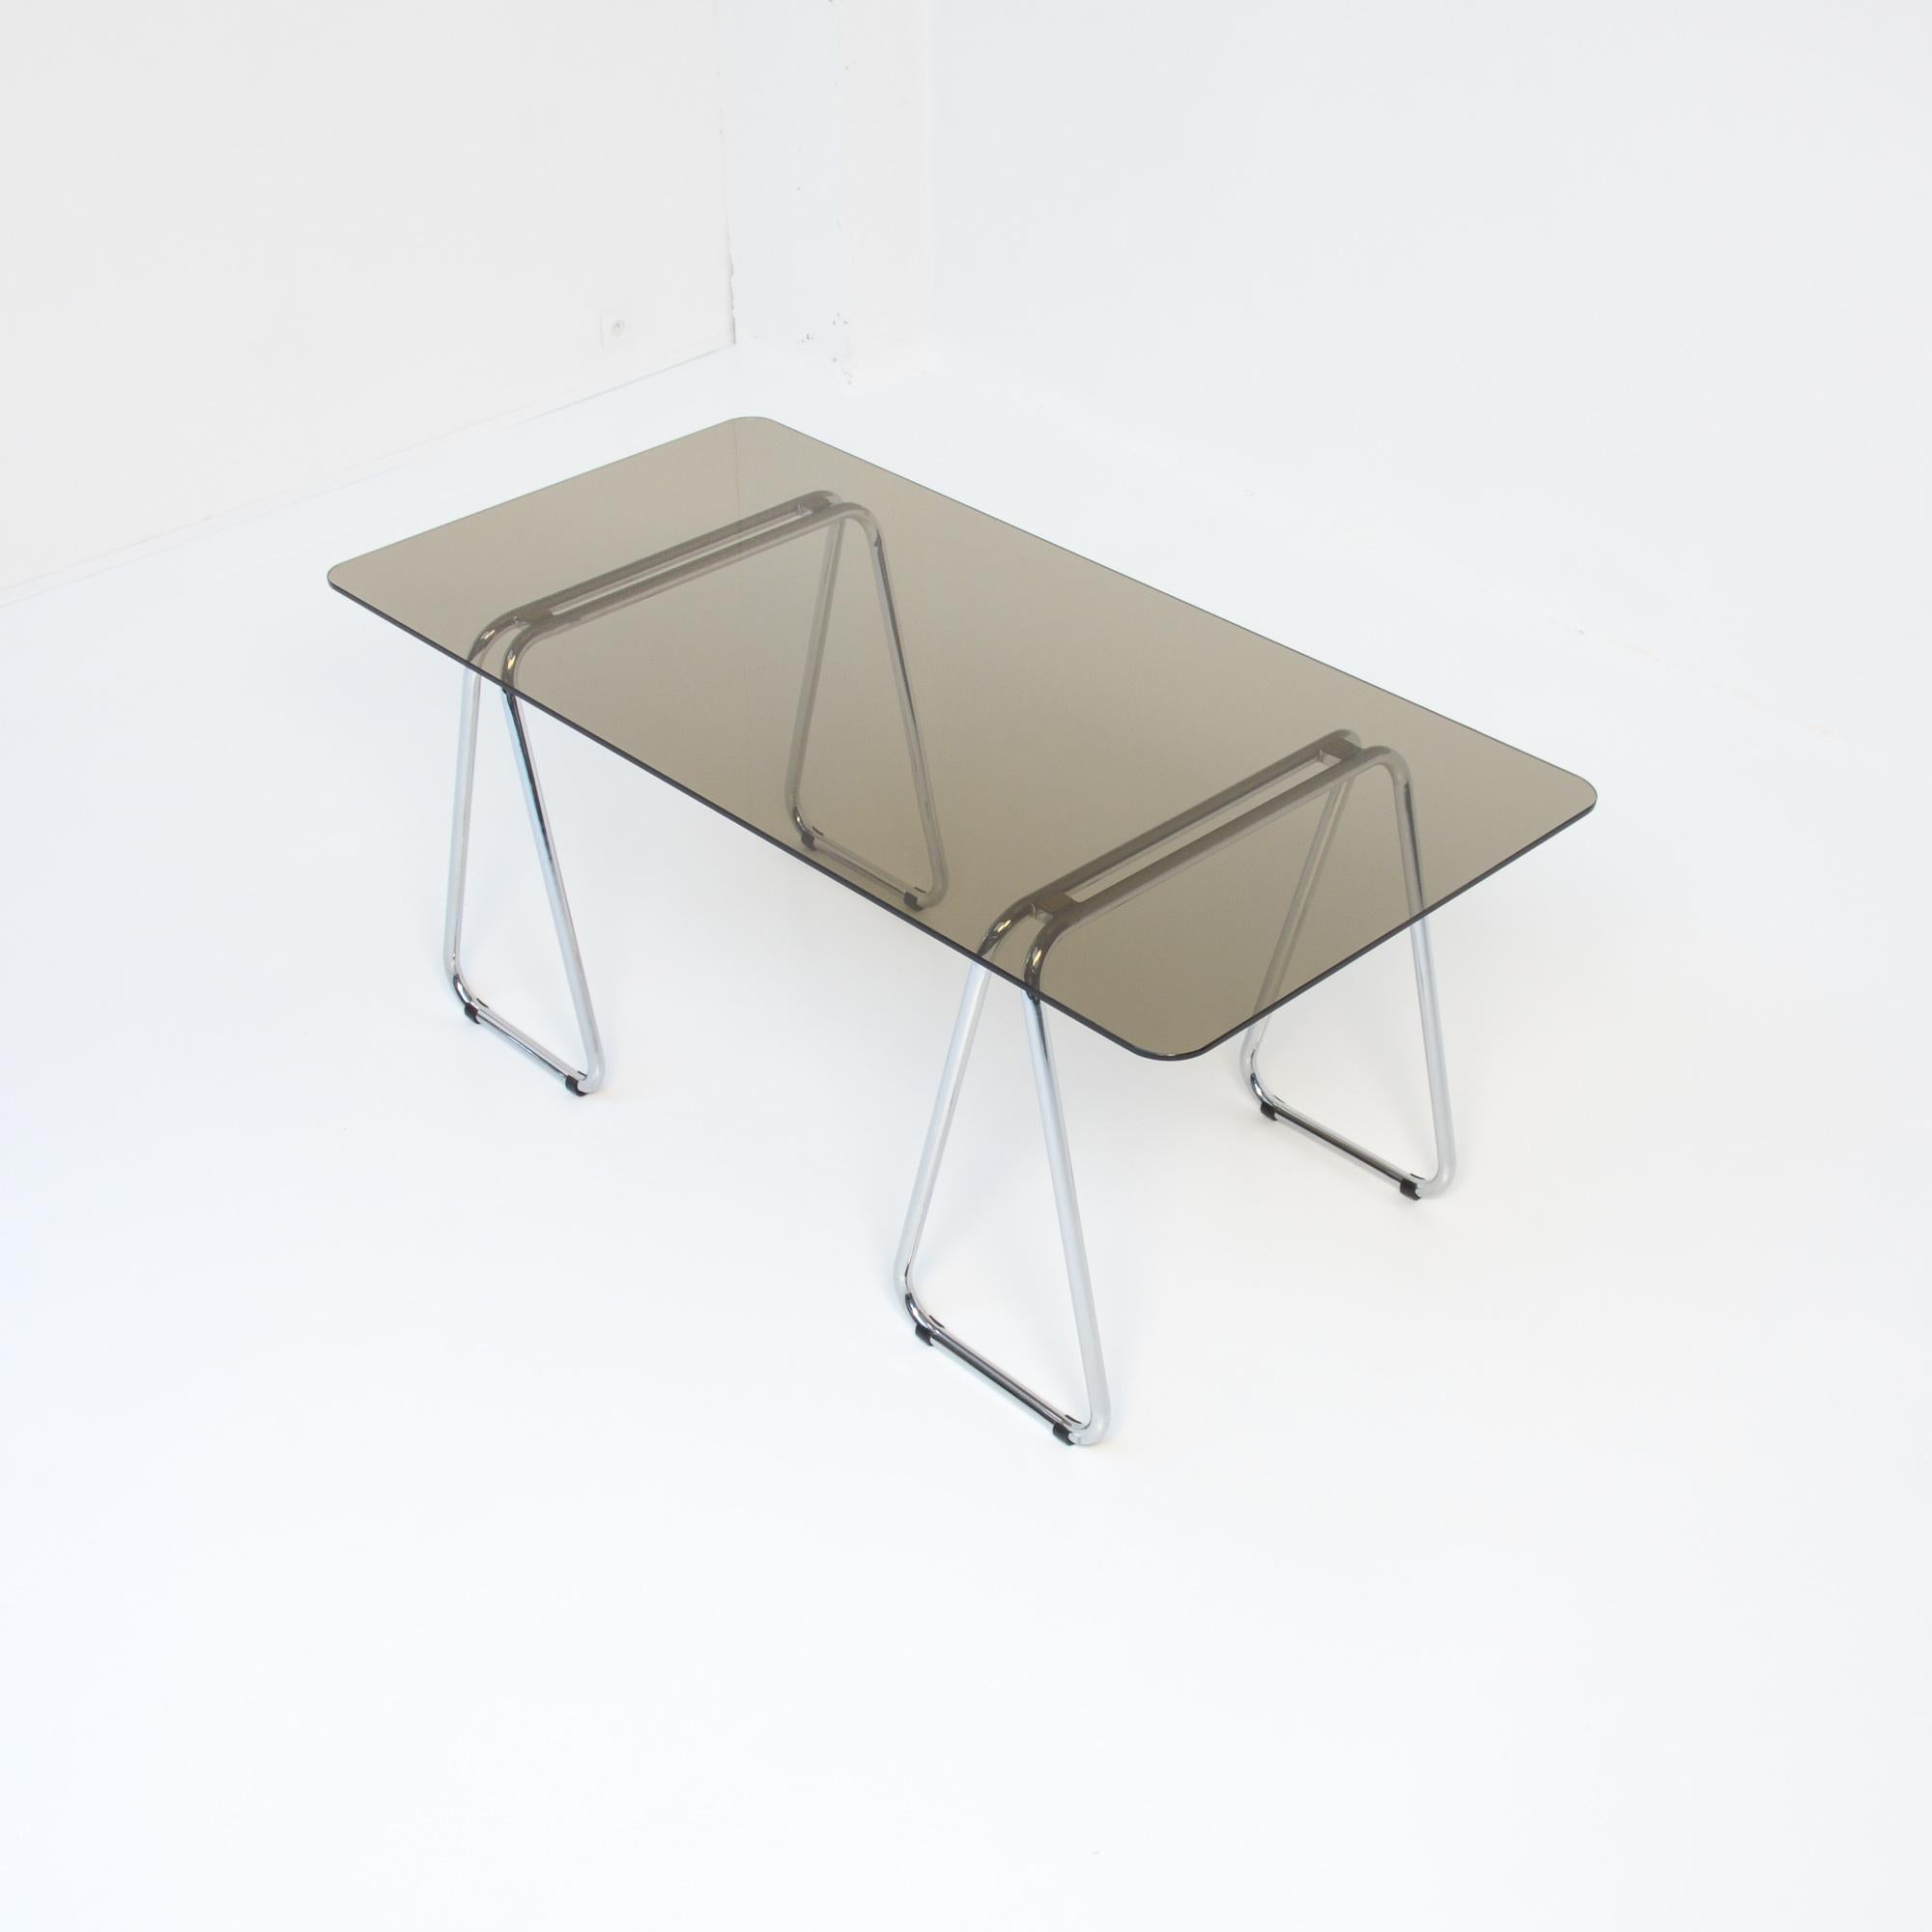 This rare drafting table or desk was designed by Marcel Breuer in 1926. This one is produced by Gavina in the 1960s.
The trestles are made of chromed metal and the tabletop is made of brown smoked glass.
It is a very rare piece and a beautiful set